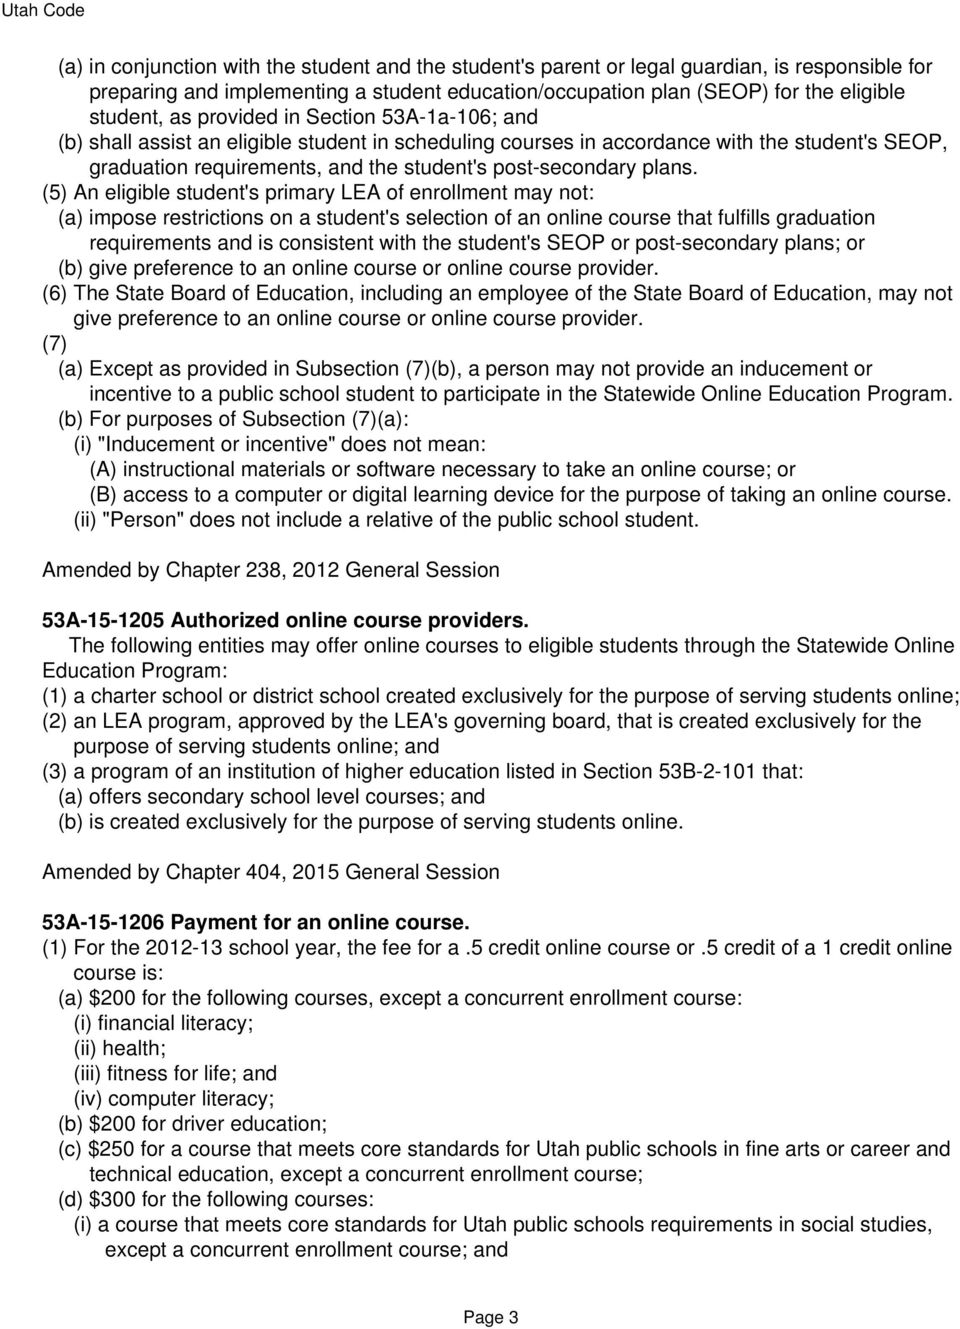 (5) An eligible student's primary LEA of enrollment may not: (a) impose restrictions on a student's selection of an online course that fulfills graduation requirements and is consistent with the